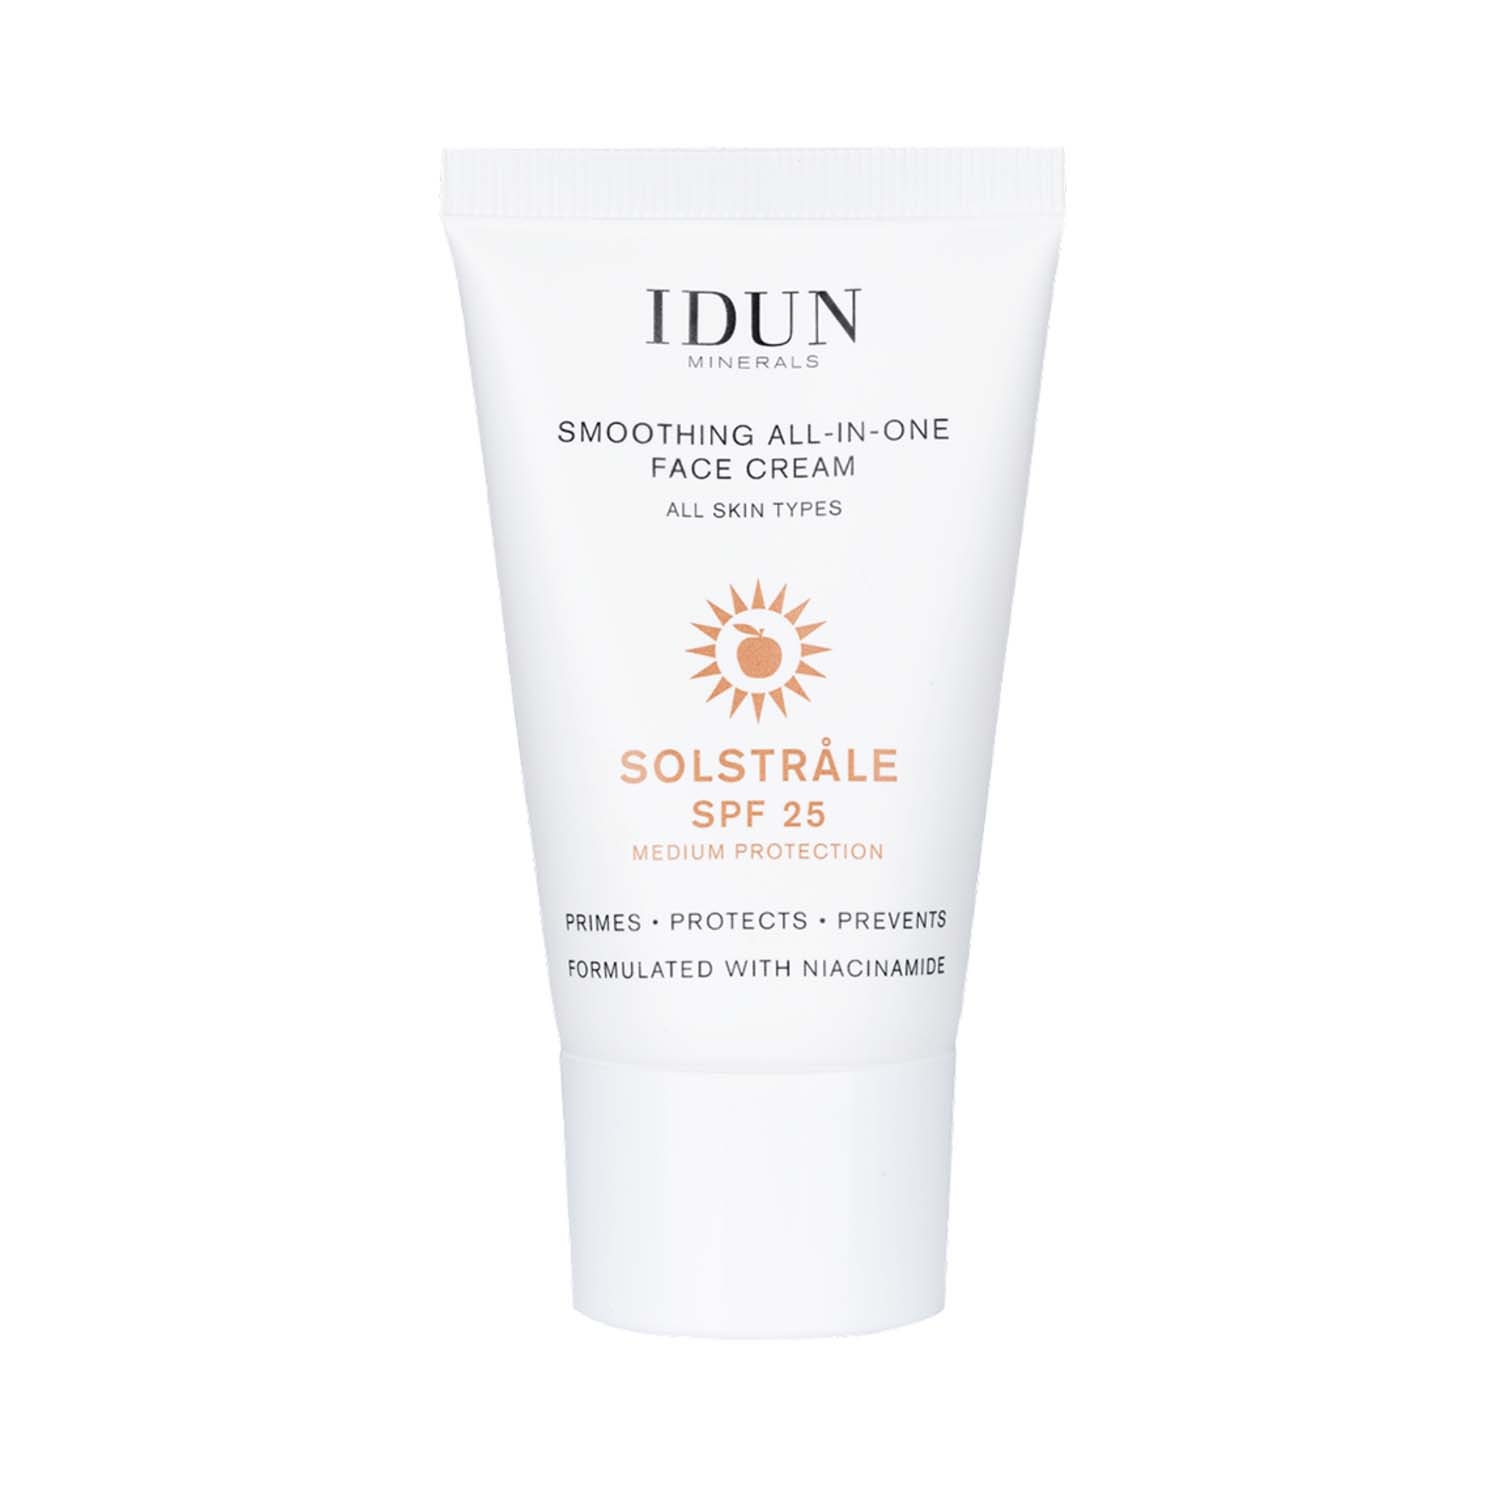 IDUN Minerals | IDUN Minerals Smoothing All-In-One Face Cream SPF 25 (30ml)